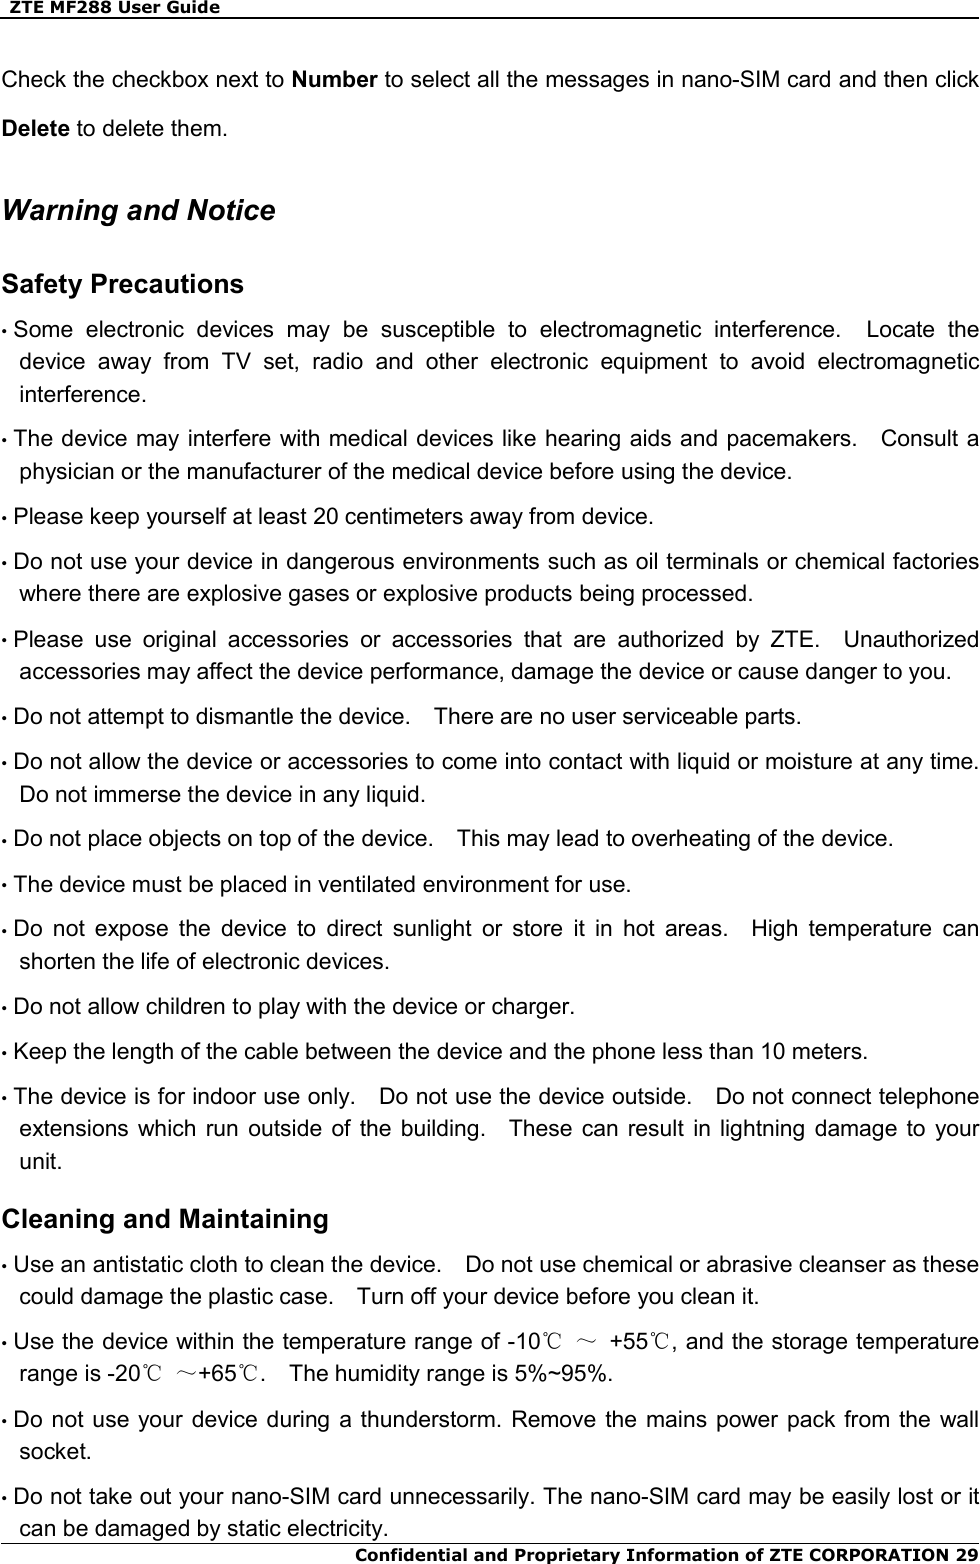   ZTE MF288 User Guide  Confidential and Proprietary Information of ZTE CORPORATION 29Check the checkbox next to Number to select all the messages in nano-SIM card and then click Delete to delete them.   Warning and Notice Safety Precautions • Some  electronic  devices  may  be  susceptible  to  electromagnetic  interference.    Locate  the device  away  from  TV  set,  radio  and  other  electronic  equipment  to  avoid  electromagnetic interference. • The device may interfere with medical devices like hearing aids and pacemakers.    Consult a physician or the manufacturer of the medical device before using the device. • Please keep yourself at least 20 centimeters away from device. • Do not use your device in dangerous environments such as oil terminals or chemical factories where there are explosive gases or explosive products being processed. • Please  use  original  accessories  or  accessories  that  are  authorized  by  ZTE.    Unauthorized accessories may affect the device performance, damage the device or cause danger to you. • Do not attempt to dismantle the device.    There are no user serviceable parts. • Do not allow the device or accessories to come into contact with liquid or moisture at any time.   Do not immerse the device in any liquid. • Do not place objects on top of the device.    This may lead to overheating of the device. • The device must be placed in ventilated environment for use. • Do  not  expose  the  device  to  direct  sunlight  or  store  it  in  hot  areas.    High  temperature  can shorten the life of electronic devices. • Do not allow children to play with the device or charger. • Keep the length of the cable between the device and the phone less than 10 meters. • The device is for indoor use only.    Do not use the device outside.    Do not connect telephone extensions which  run  outside  of the building.    These  can  result  in lightning  damage  to  your unit. Cleaning and Maintaining • Use an antistatic cloth to clean the device.    Do not use chemical or abrasive cleanser as these could damage the plastic case.    Turn off your device before you clean it. • Use the device within the temperature range of -10℃ ～  +55℃, and the storage temperature range is -20℃ ～+65℃.    The humidity range is 5%~95%.   • Do not  use your  device during  a thunderstorm. Remove the  mains power pack from the wall socket. • Do not take out your nano-SIM card unnecessarily. The nano-SIM card may be easily lost or it can be damaged by static electricity. 